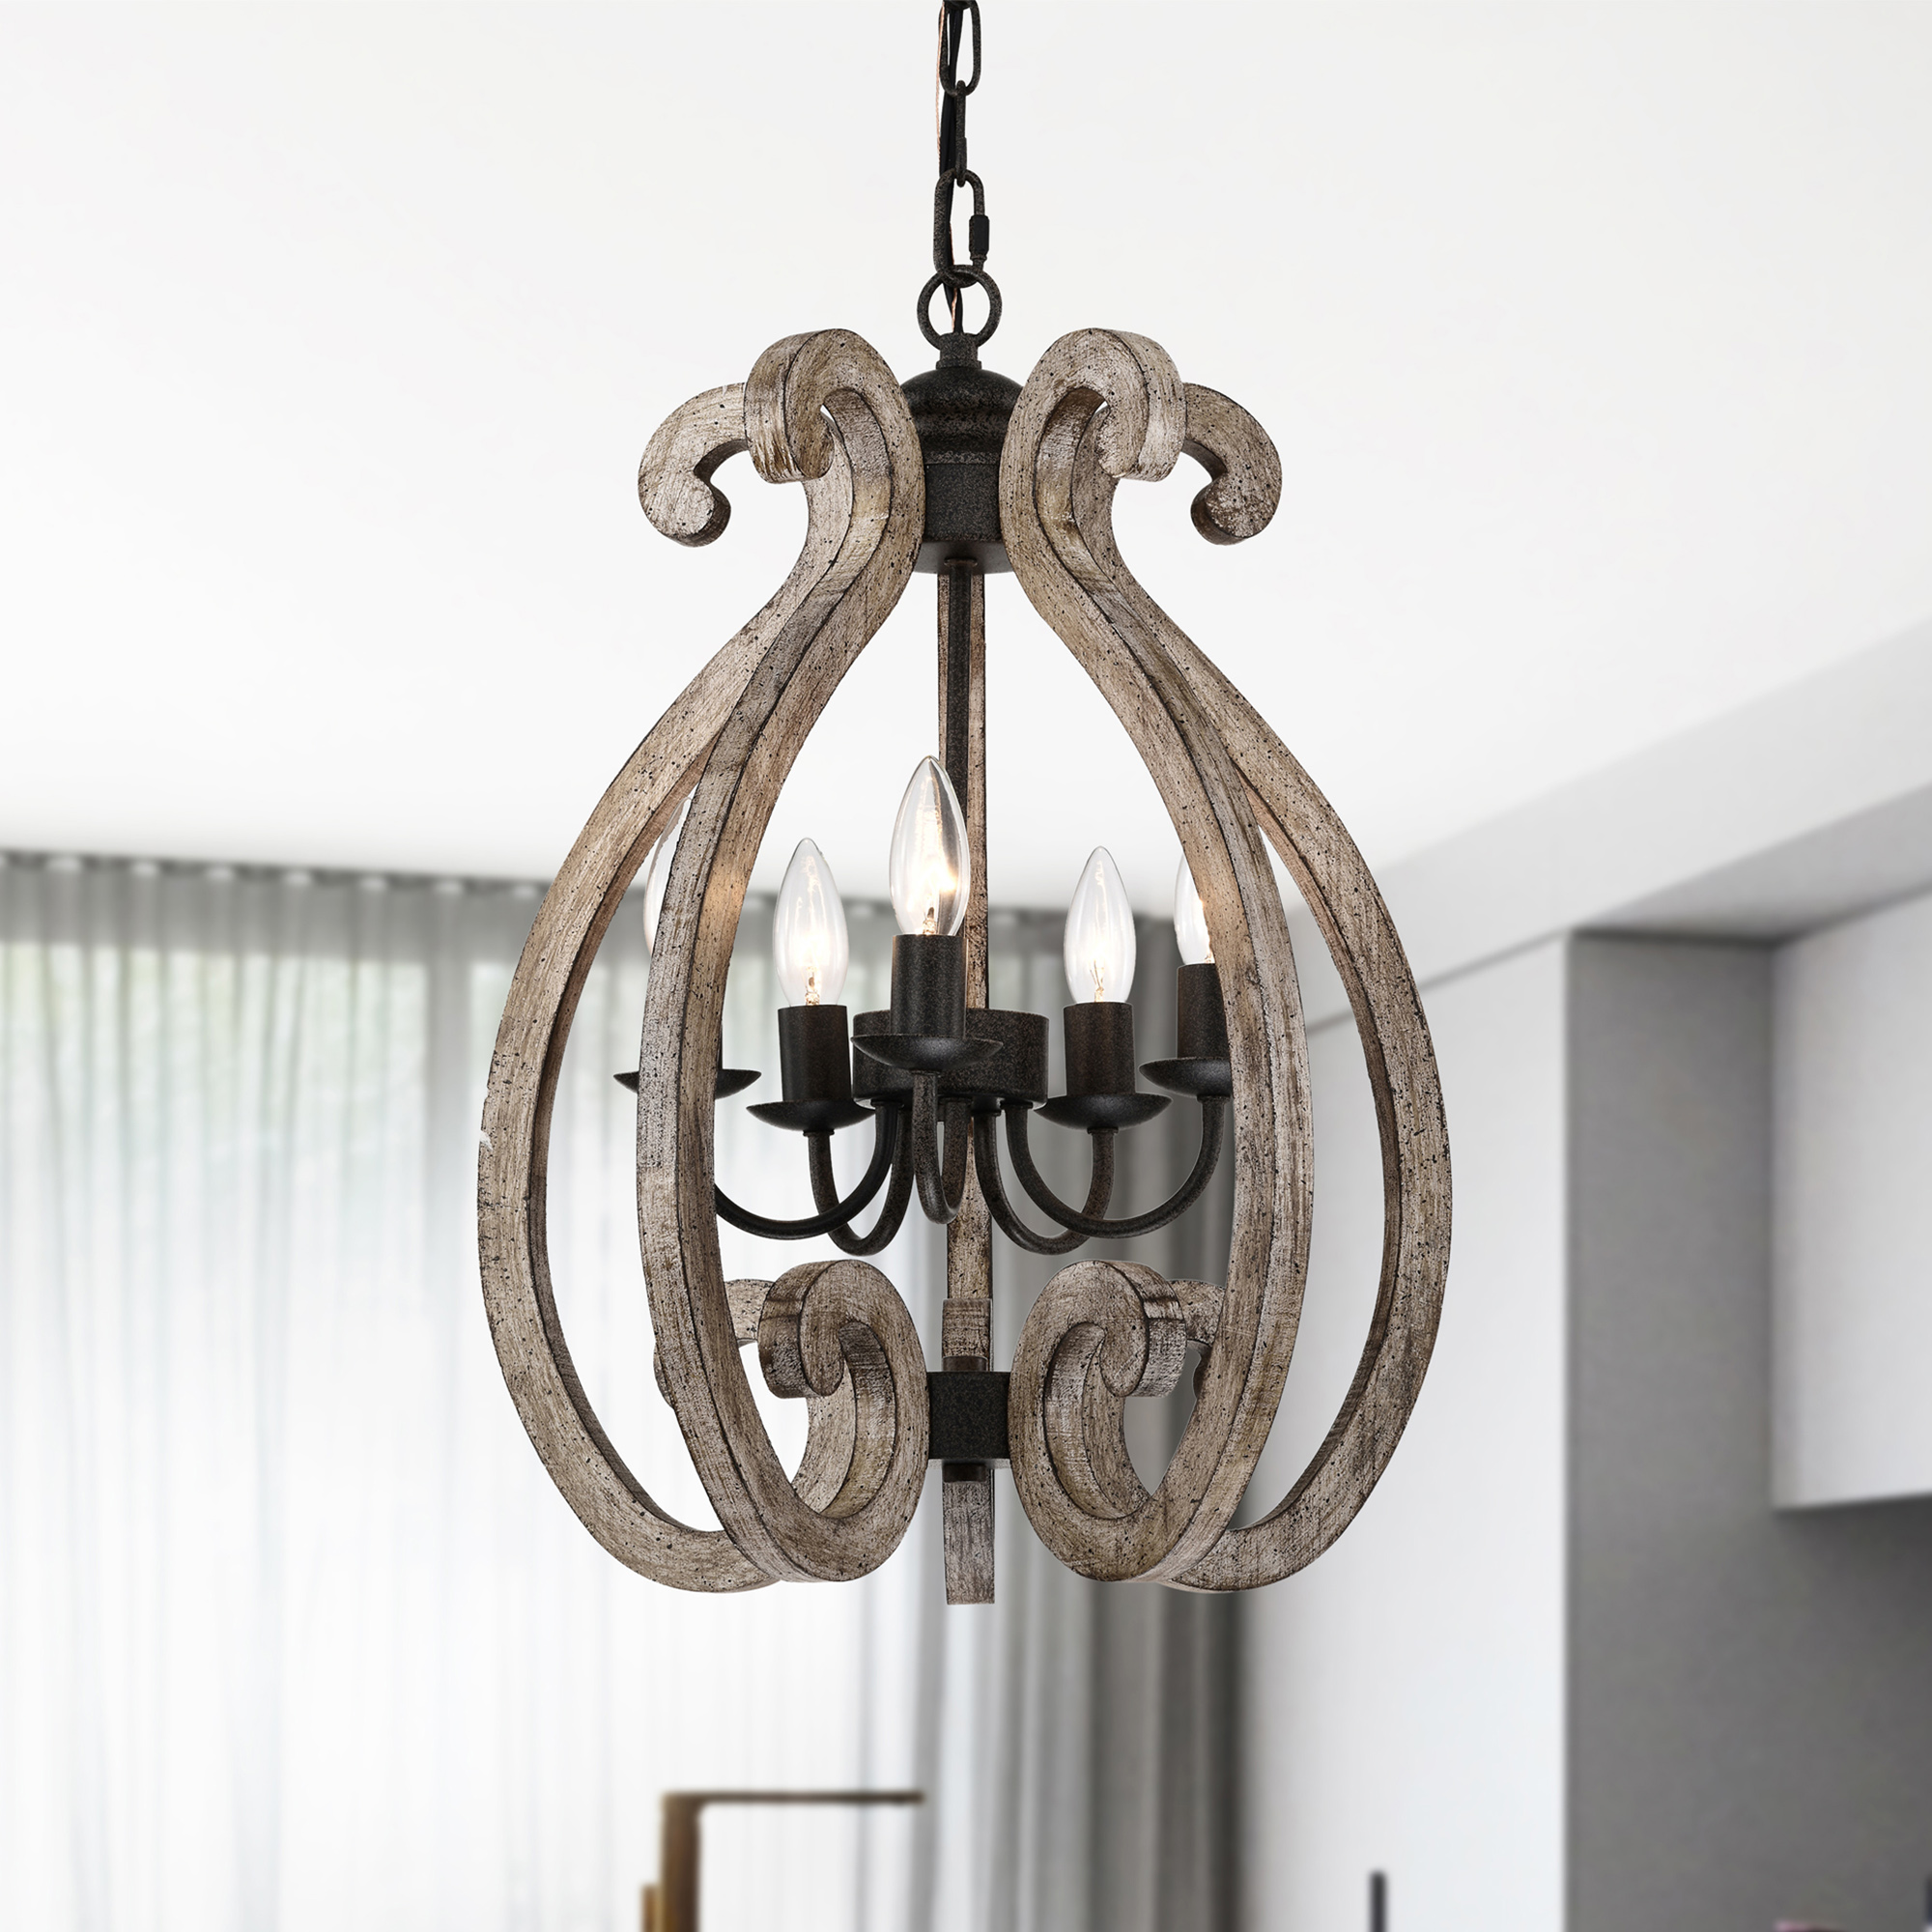 Lina 17 in. 6-Light Indoor Rustic Brown and Faux Wood Grain Finish Chandelier with Light Kit